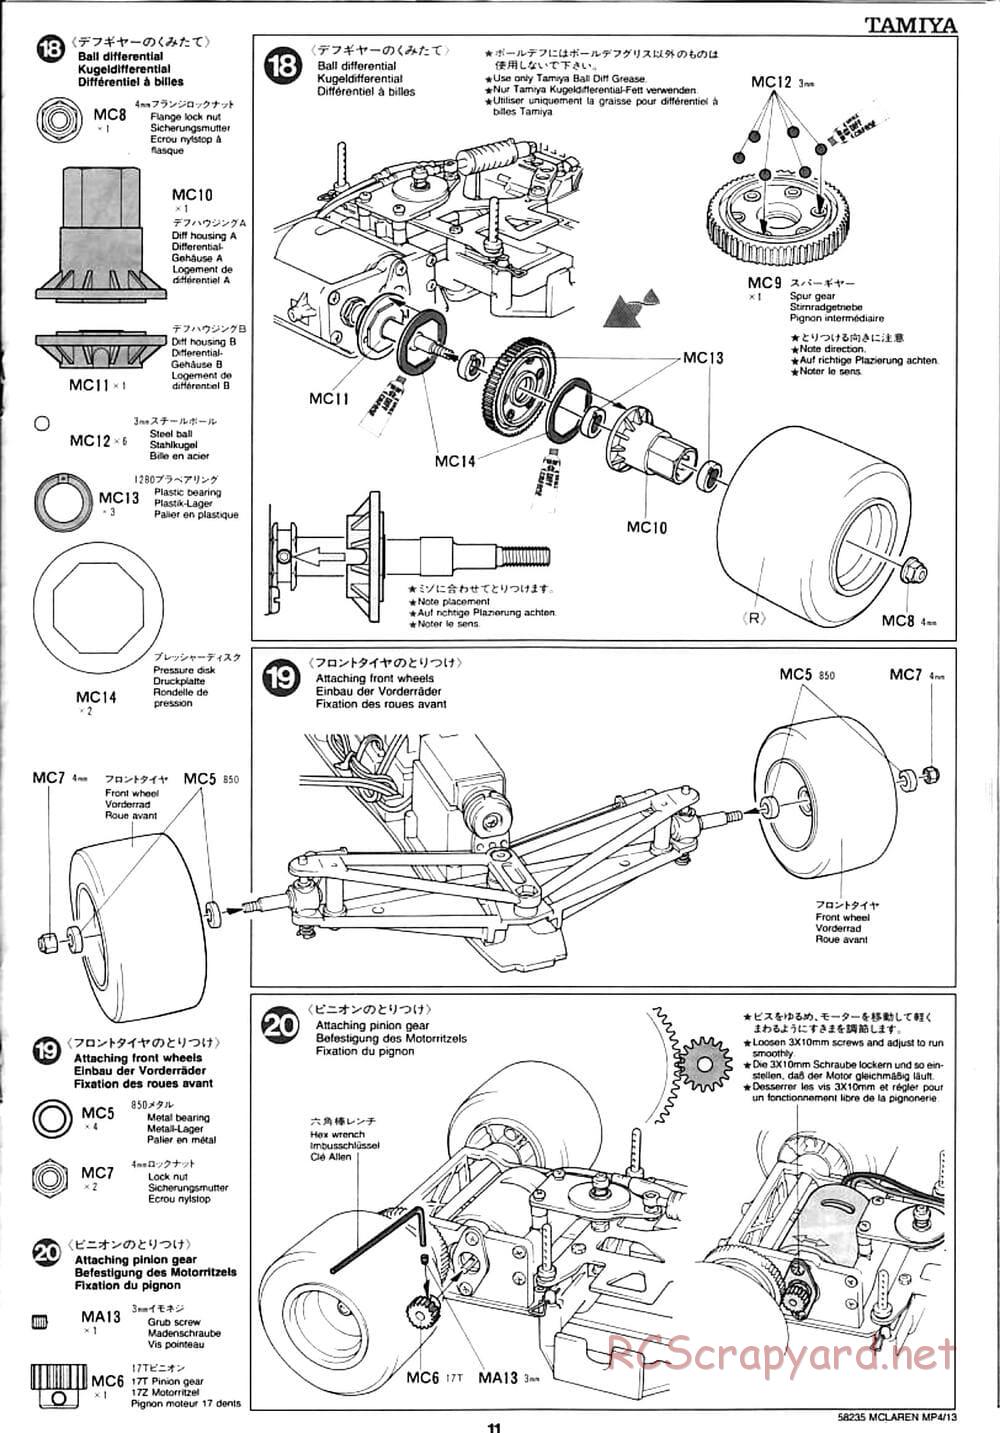 Tamiya - McLaren Mercedes MP4/13 - F103RS Chassis - Manual - Page 11